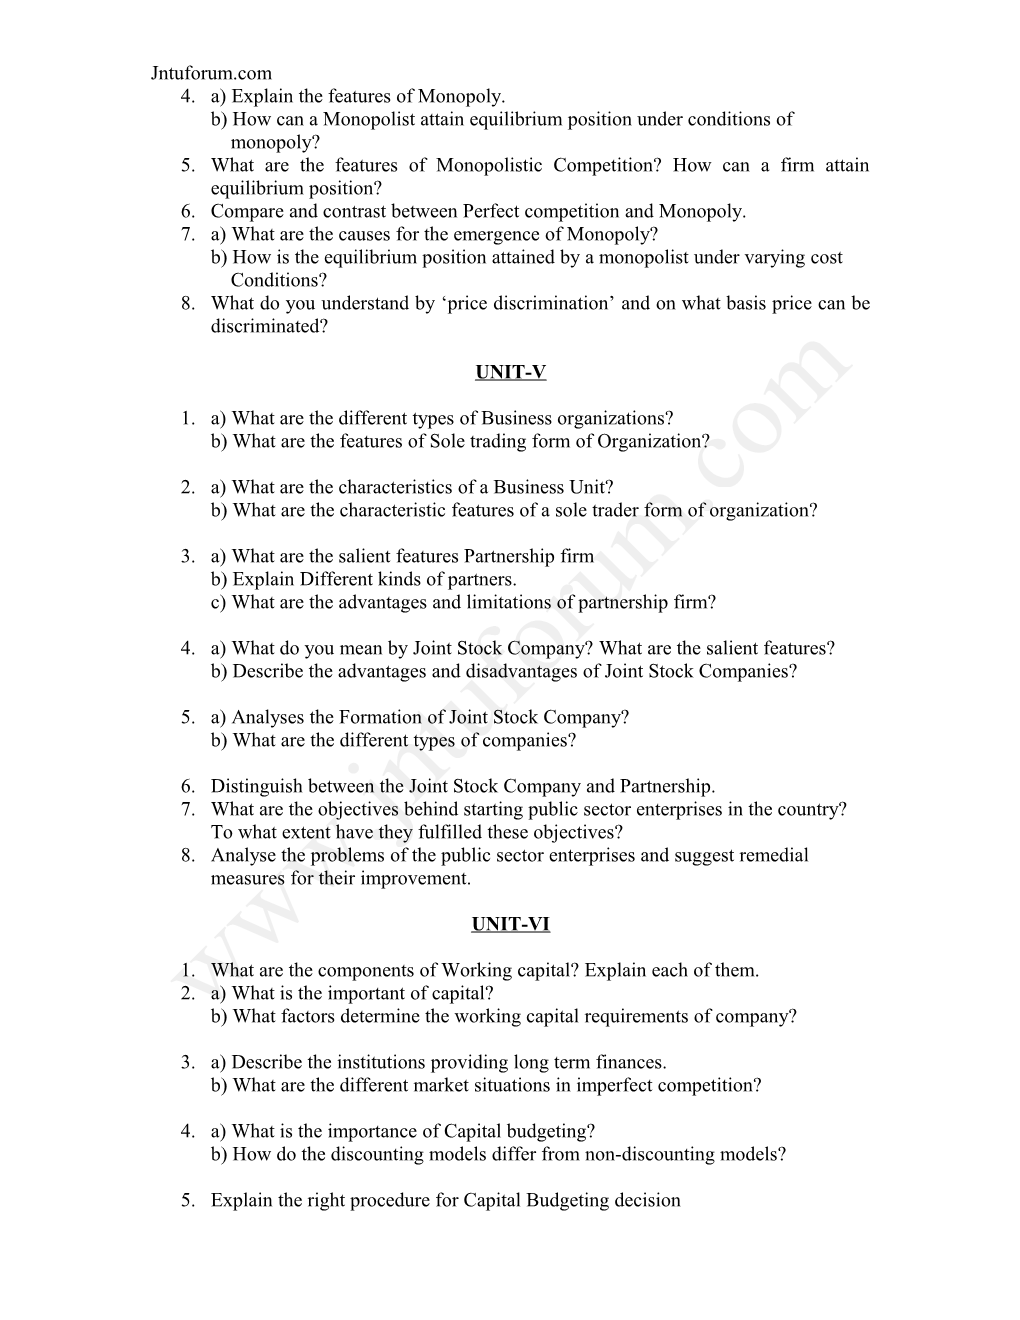 Most Important Questions for Final Exam, MEFA (Unit Wise)